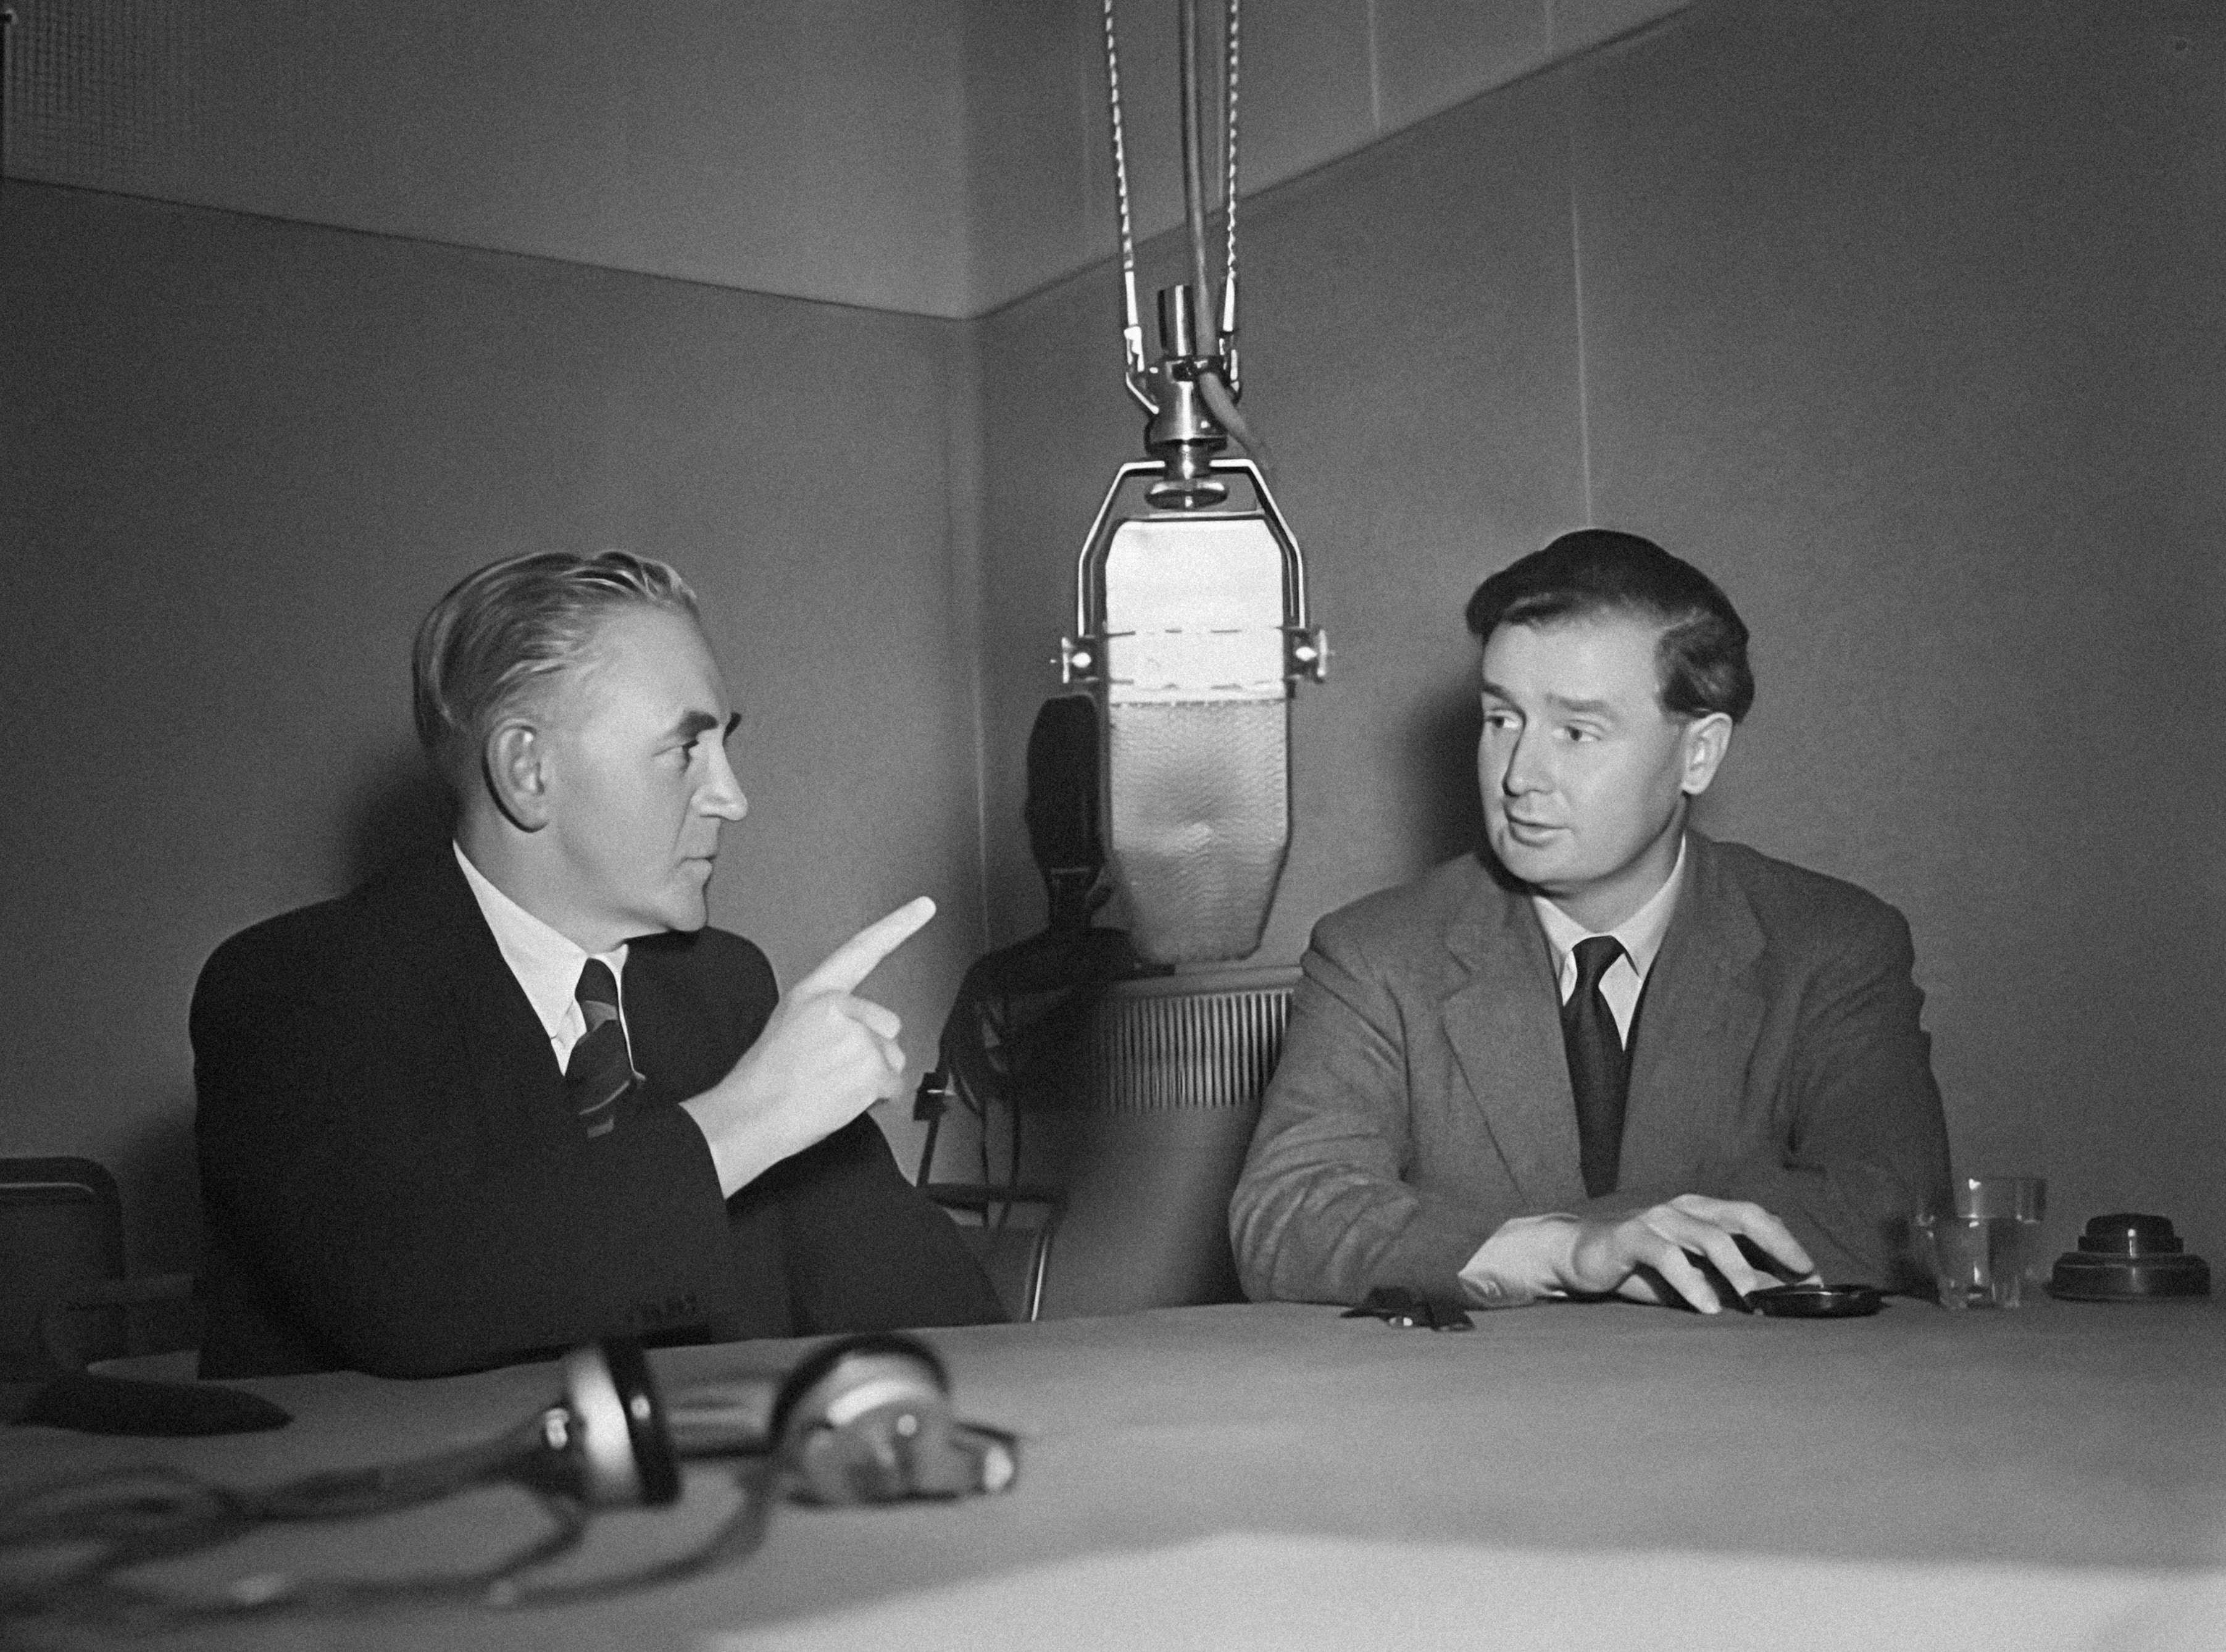 Two 1950's men un suits sit at a table dominated by a large hanging microphone. One points a raise hand and finger into the air. The other listens.